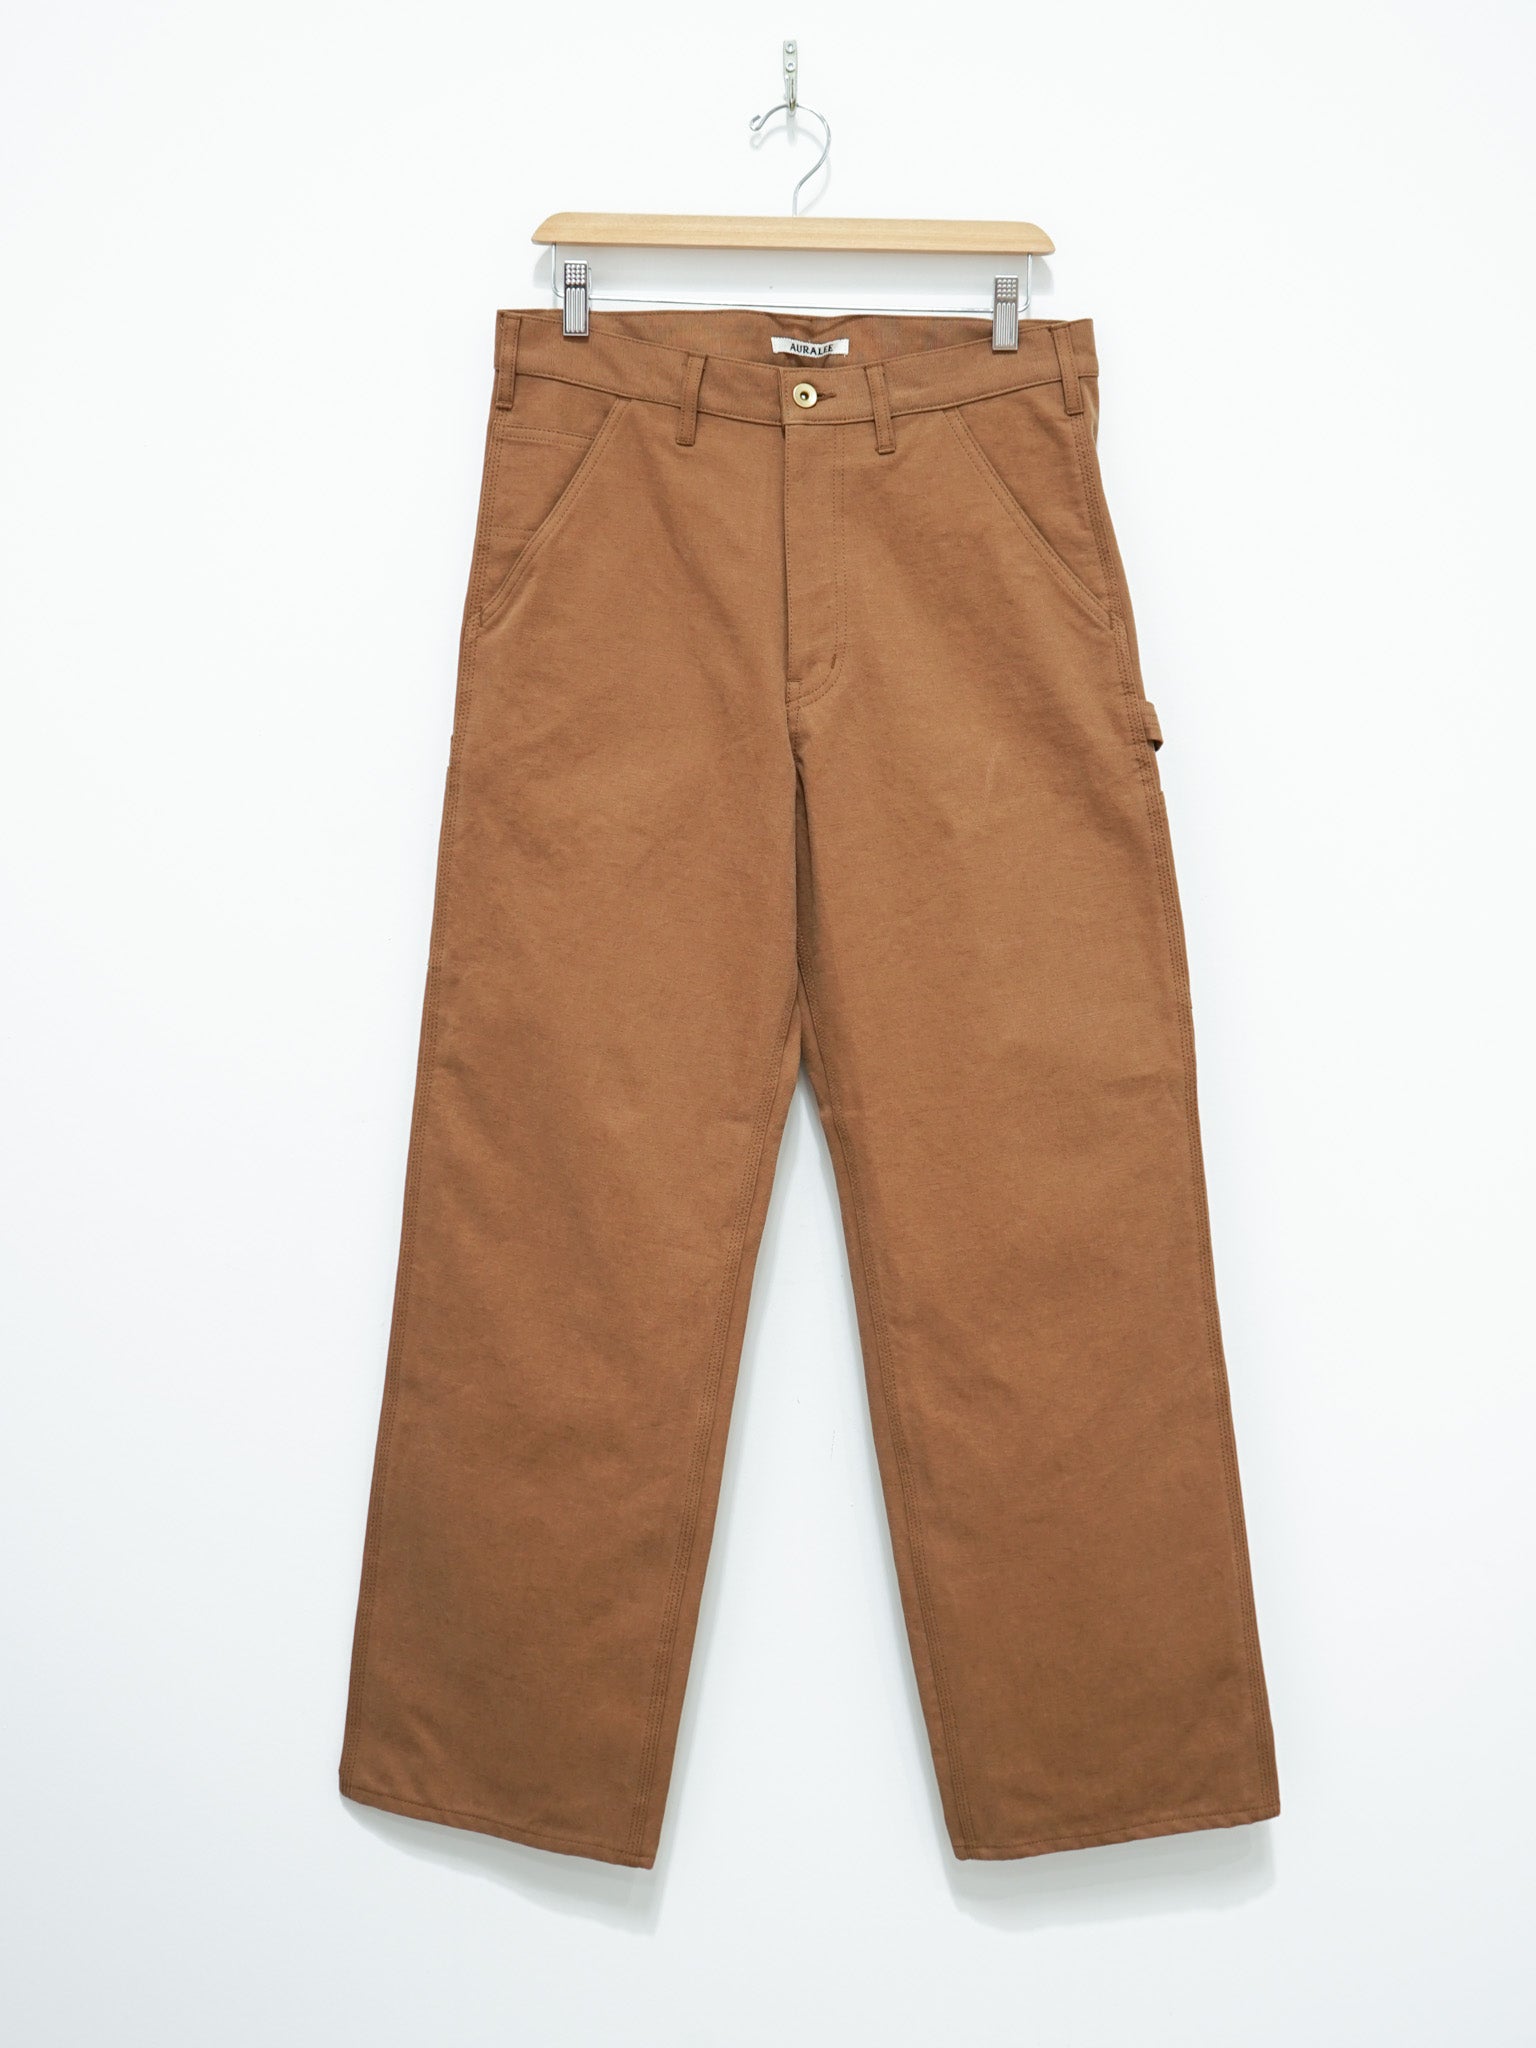 Work Pant - Stretch Canvas | Naked & Famous Denim